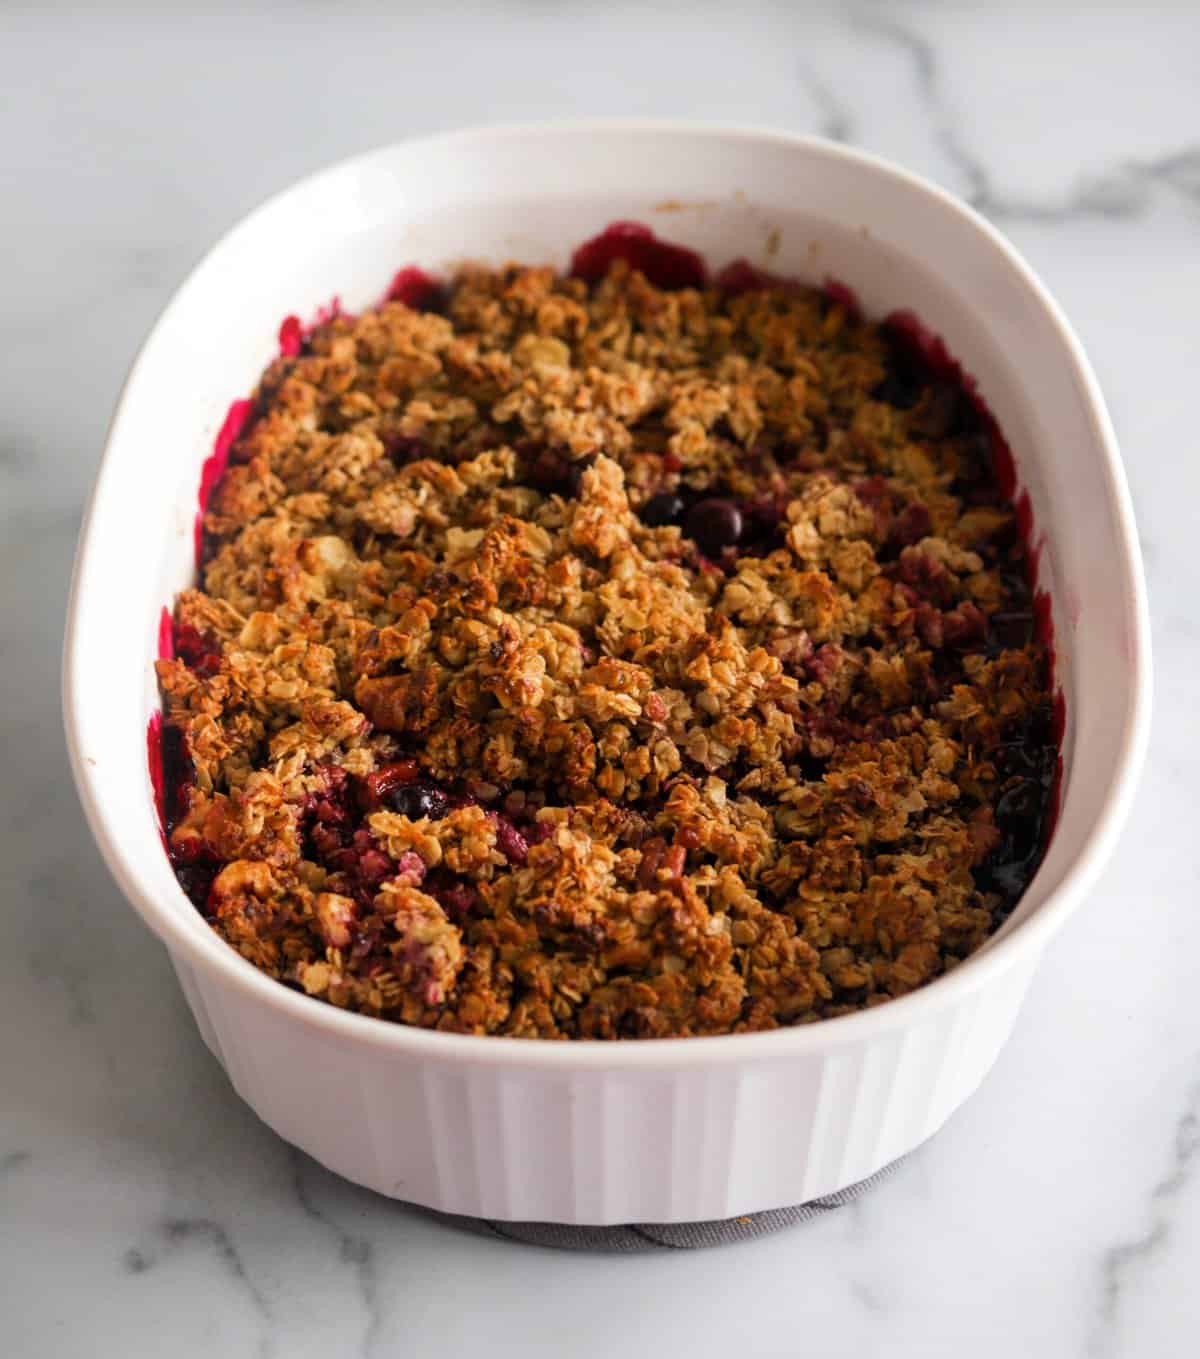 A side shot of a dish of healthy blueberry crumble.